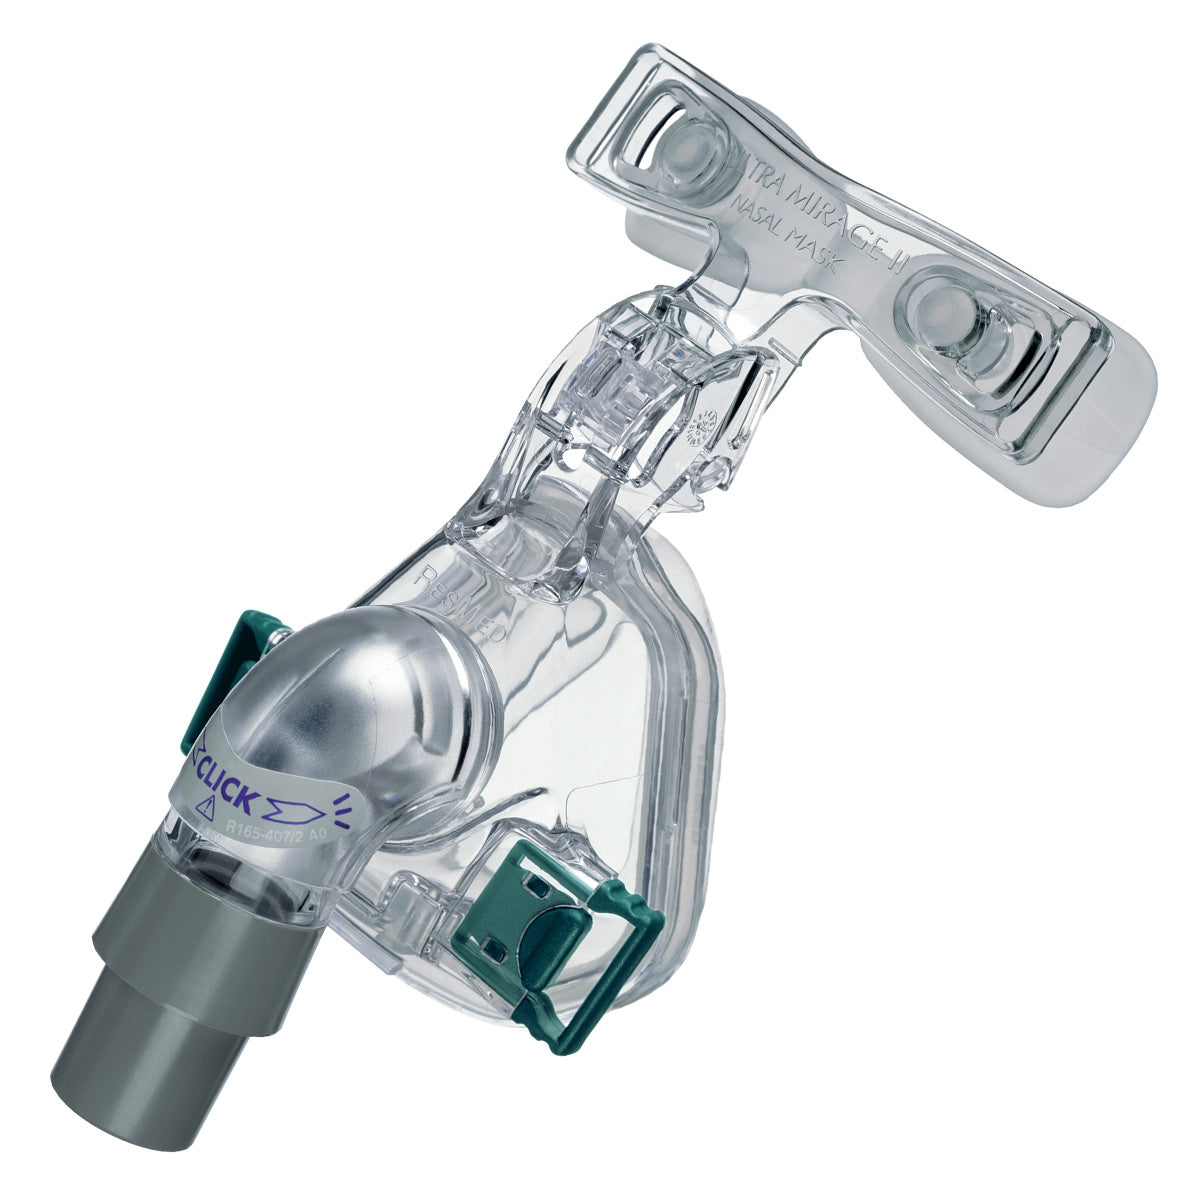 SHALLOW WIDE Ultra Mirage II Nasal CPAP/BiLevel Mask with Headgear